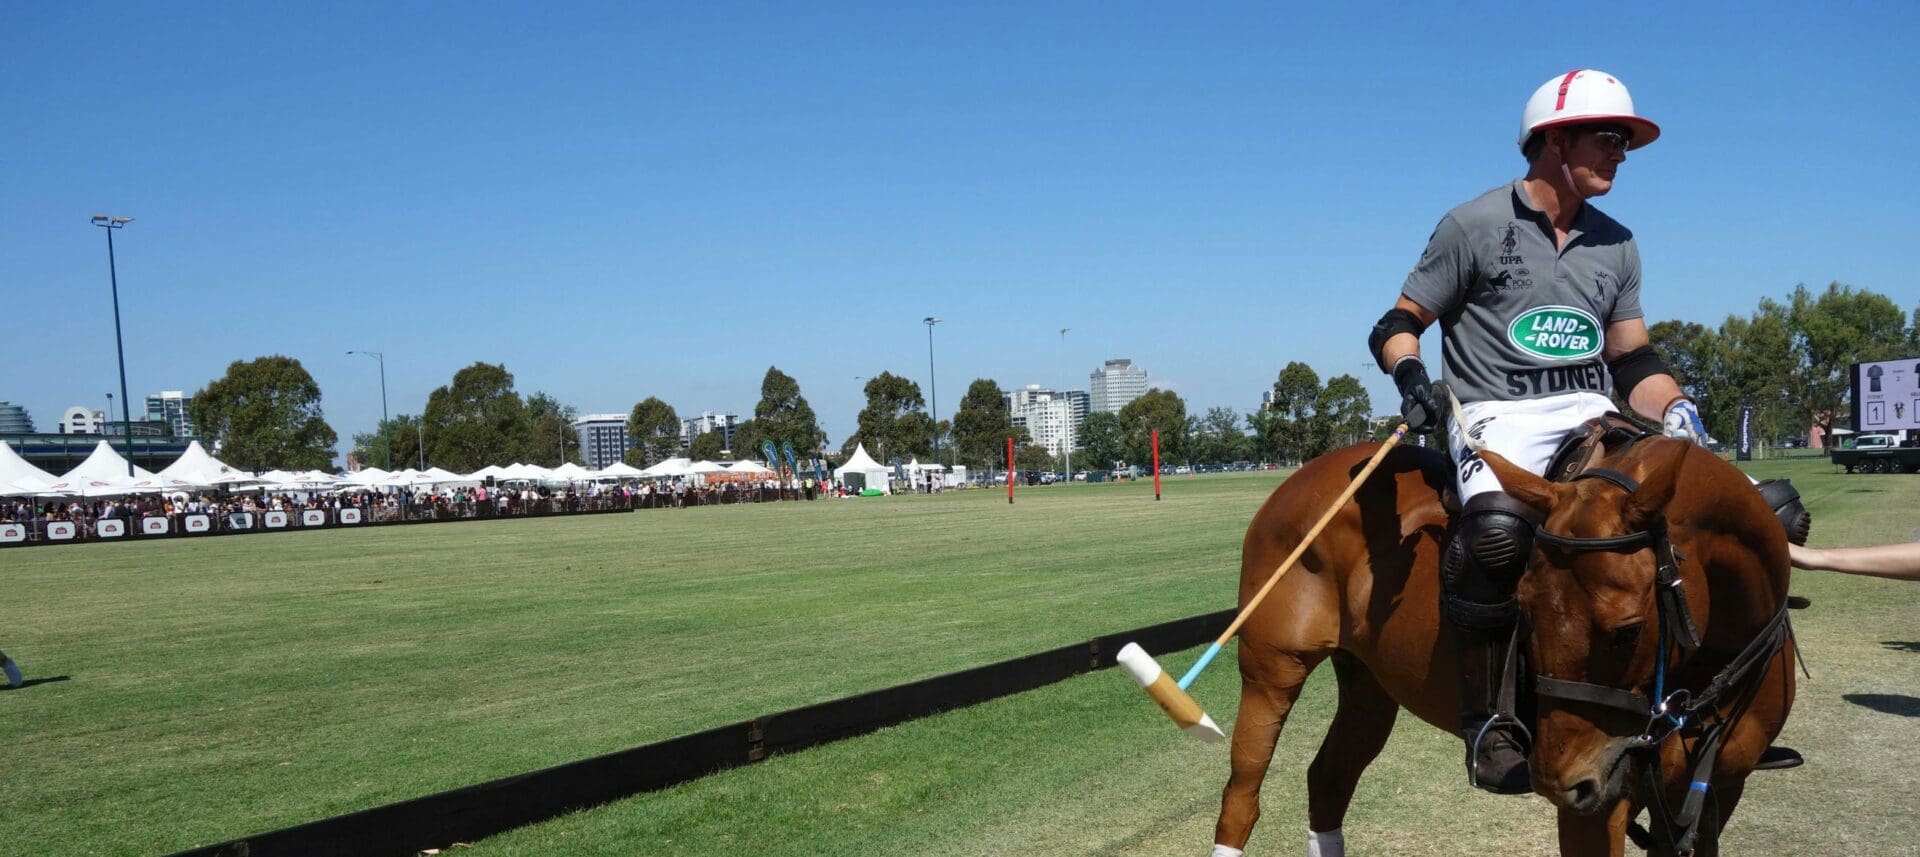 EVENT: Polo is the new racing, and Time+Tide is saddling up for the season